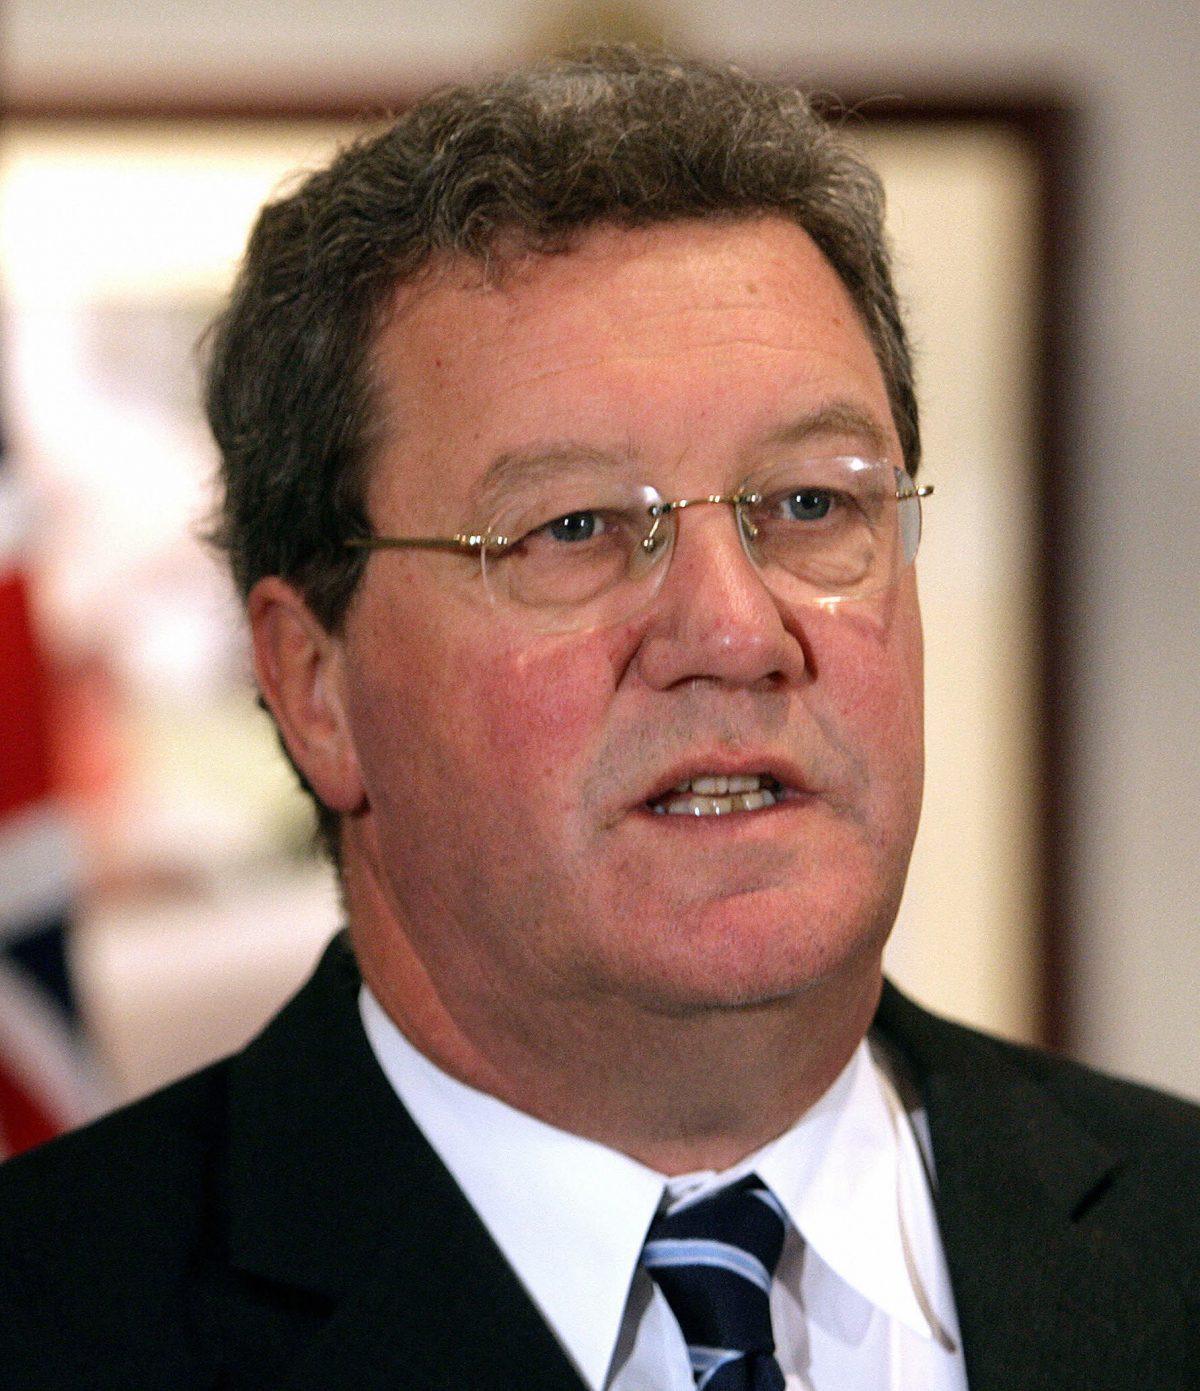 Australian high commissioner to the UK, Alexander Downer. (GOH CHAI HIN/AFP/Getty Images)